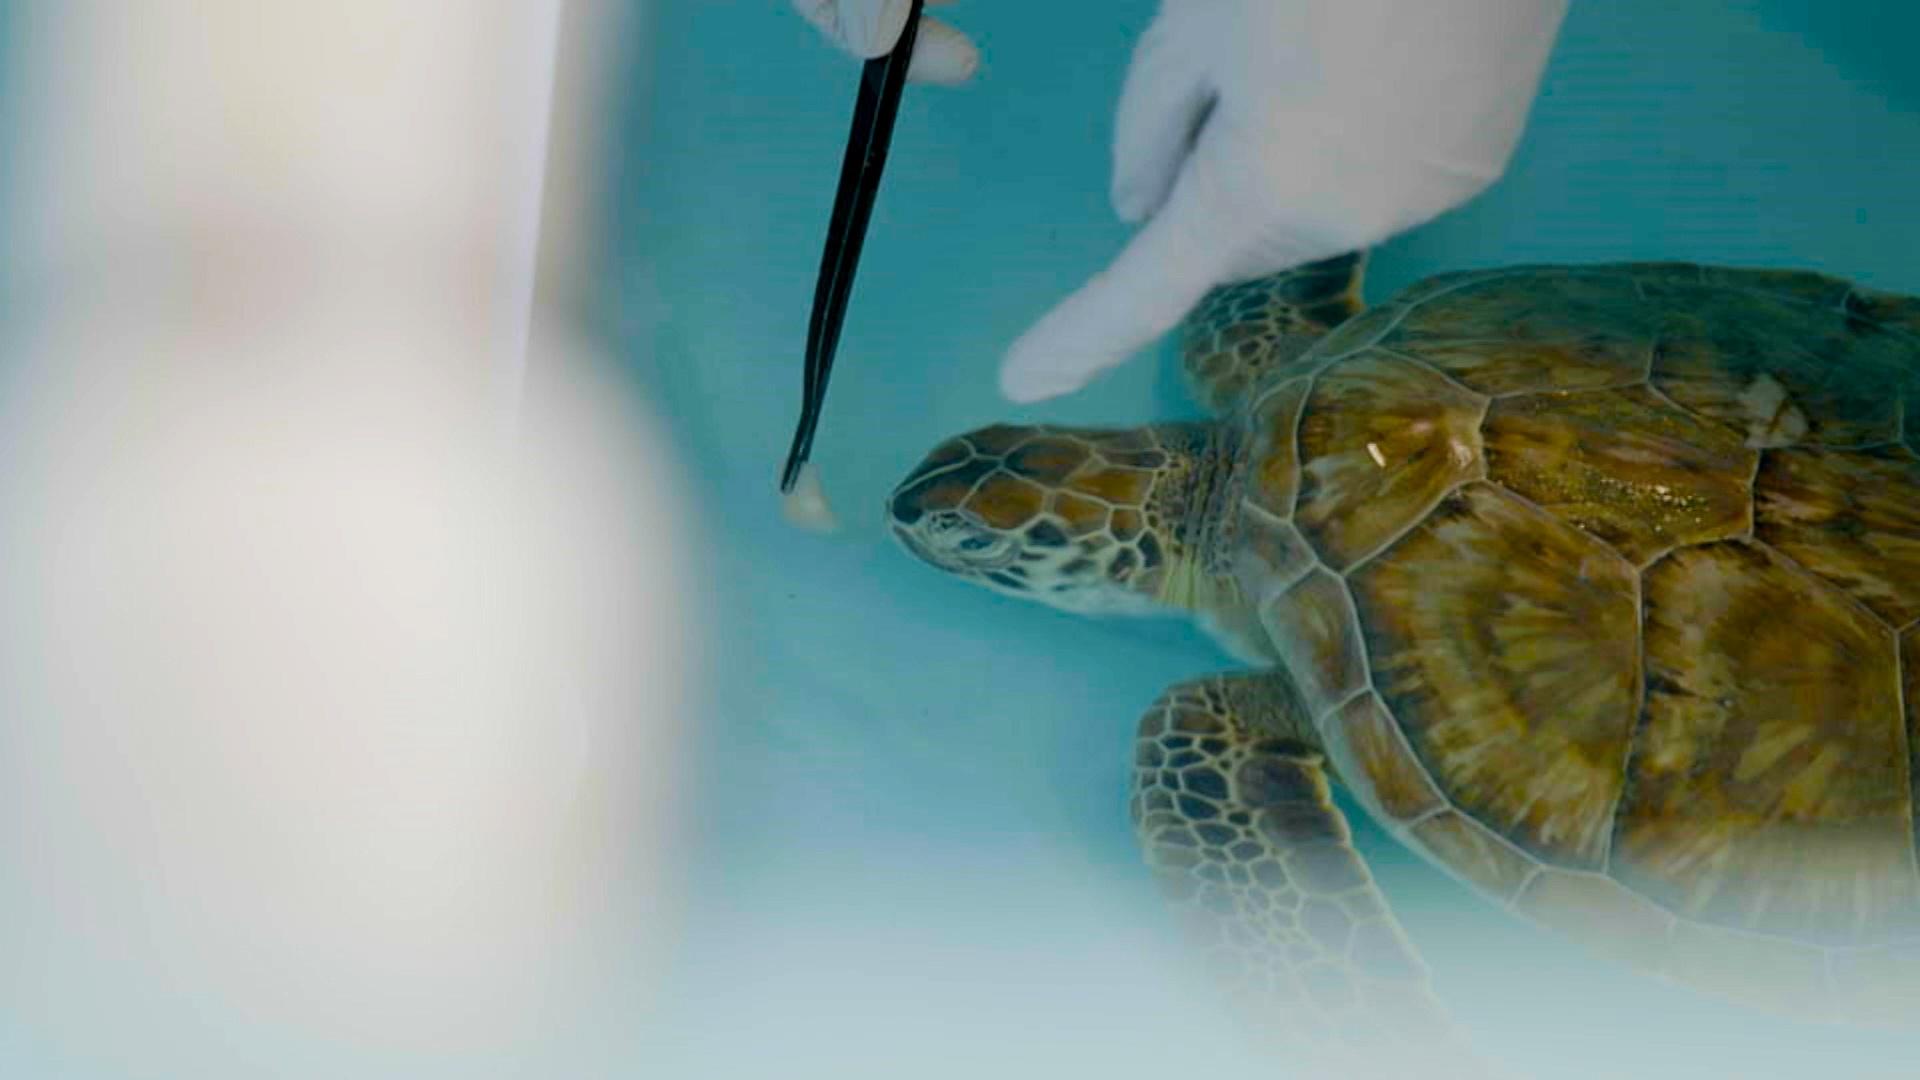 Zoo takes in 10 tiny turtles at conservation lab, Local News